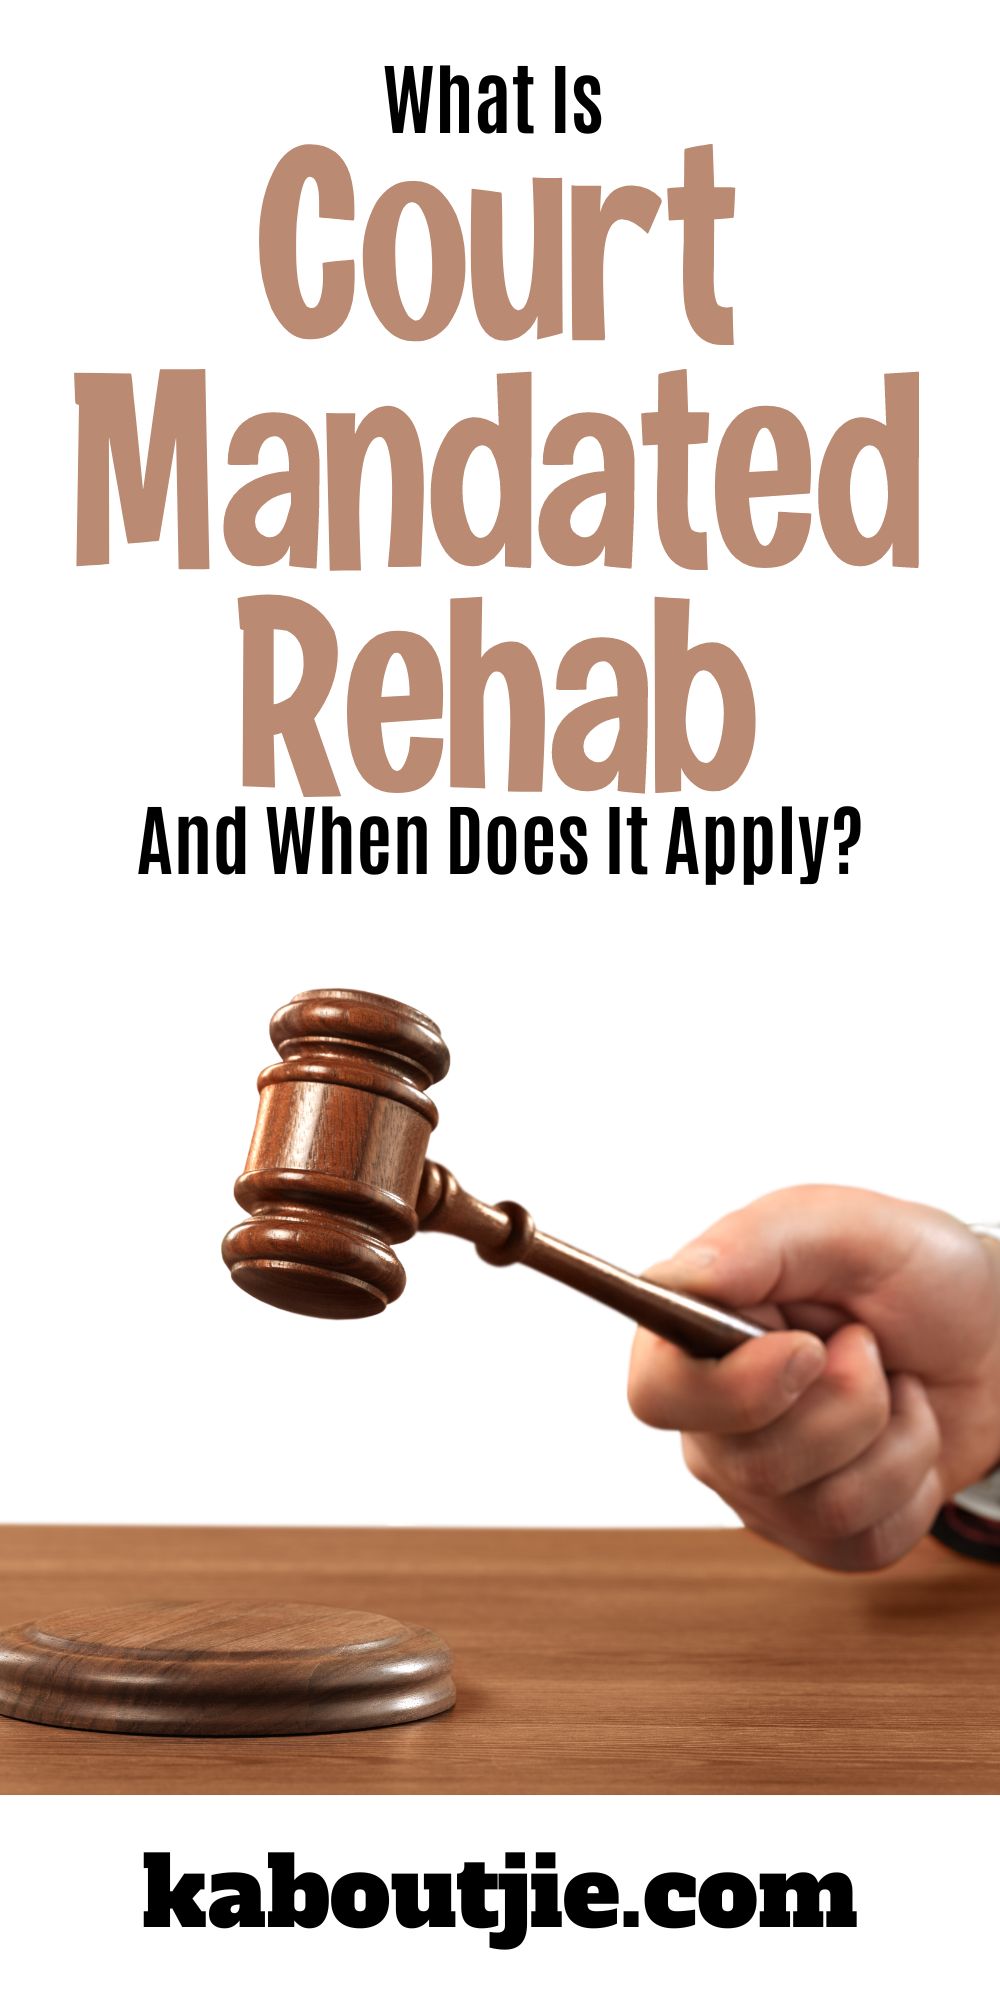 What Is Court Mandated Rehab, and When Does It Apply?